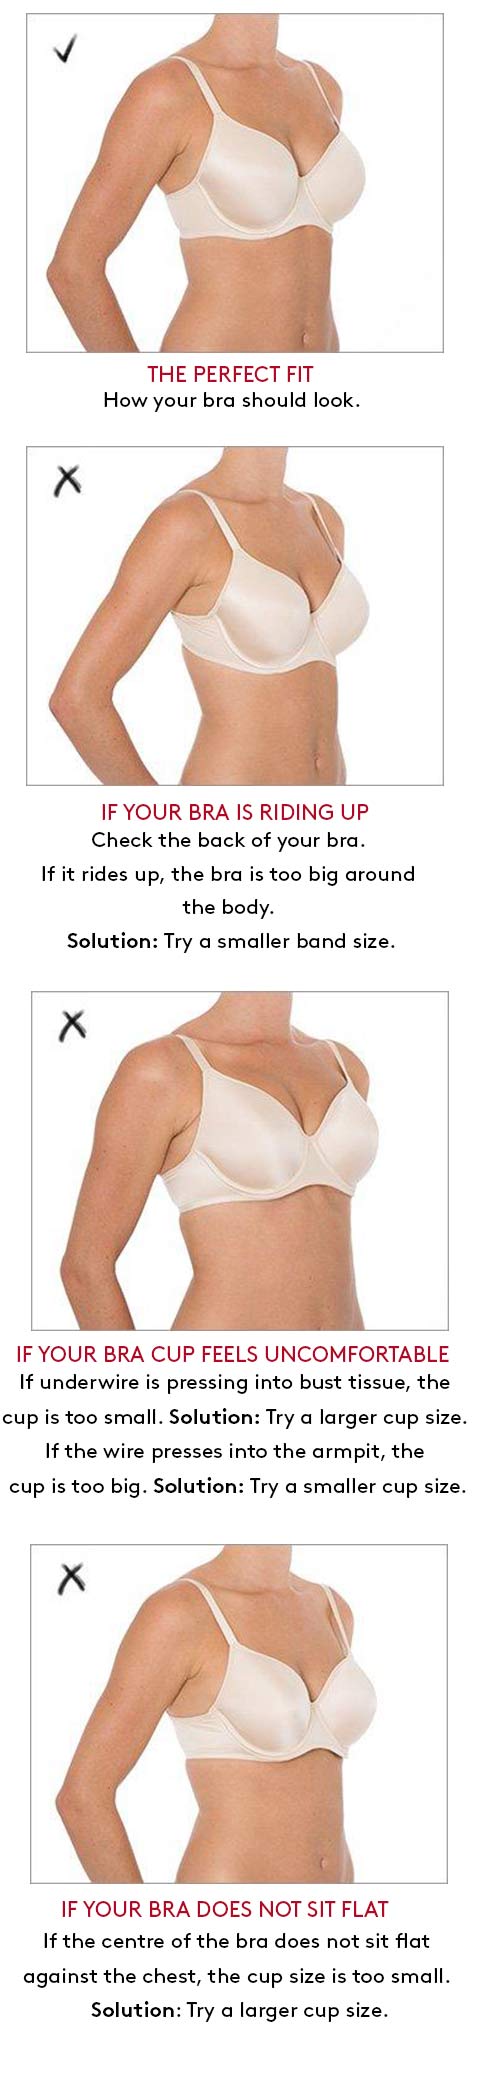 How Should a Bra Fit